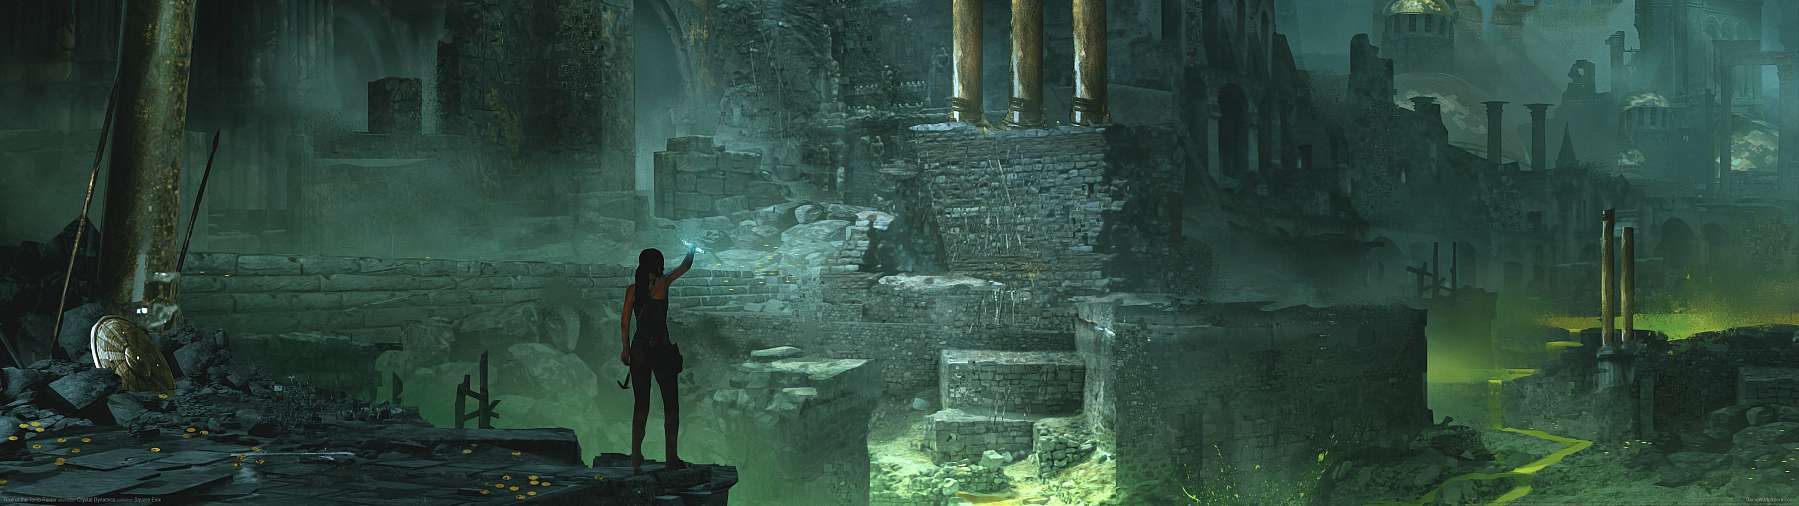 Rise of the Tomb Raider superwide fond d'cran 25